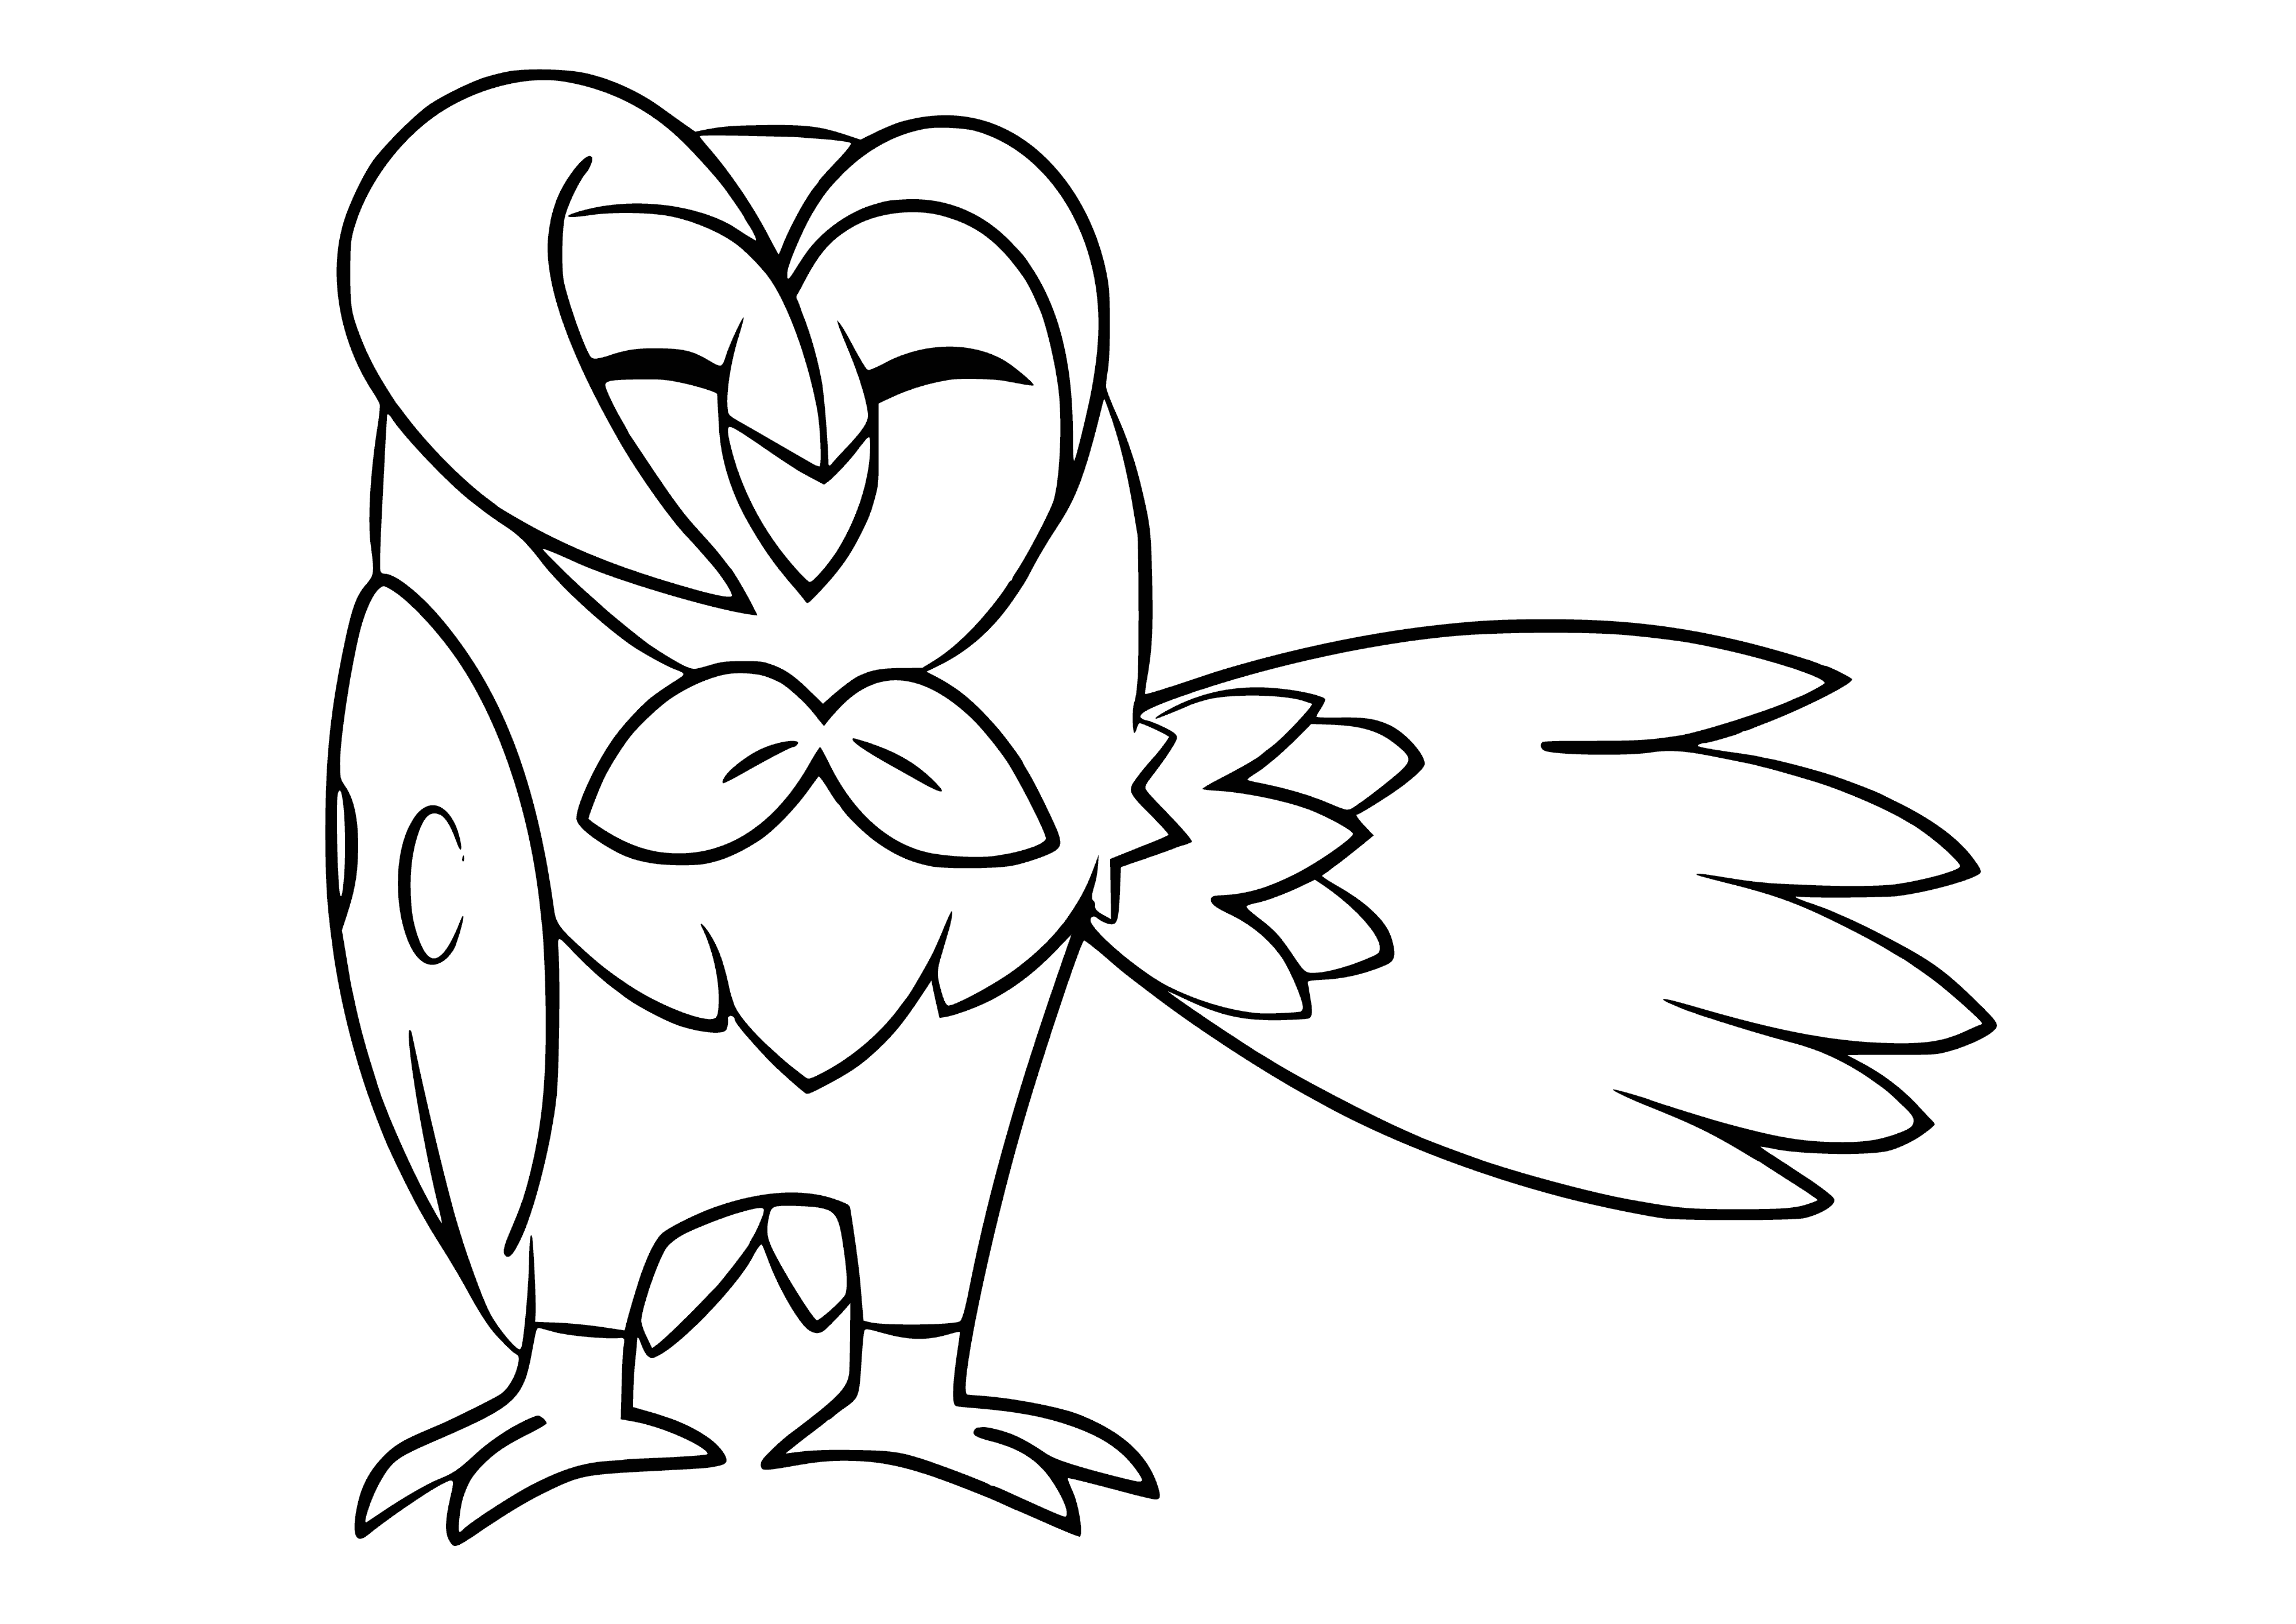 coloring page: Dartrix is a flying-grass type Pokémon w/ long neck, green/yellow feathers, two small eyes, beak,yellow wings, & tail w/ green/yellow tip. Evolves into Rowlet.